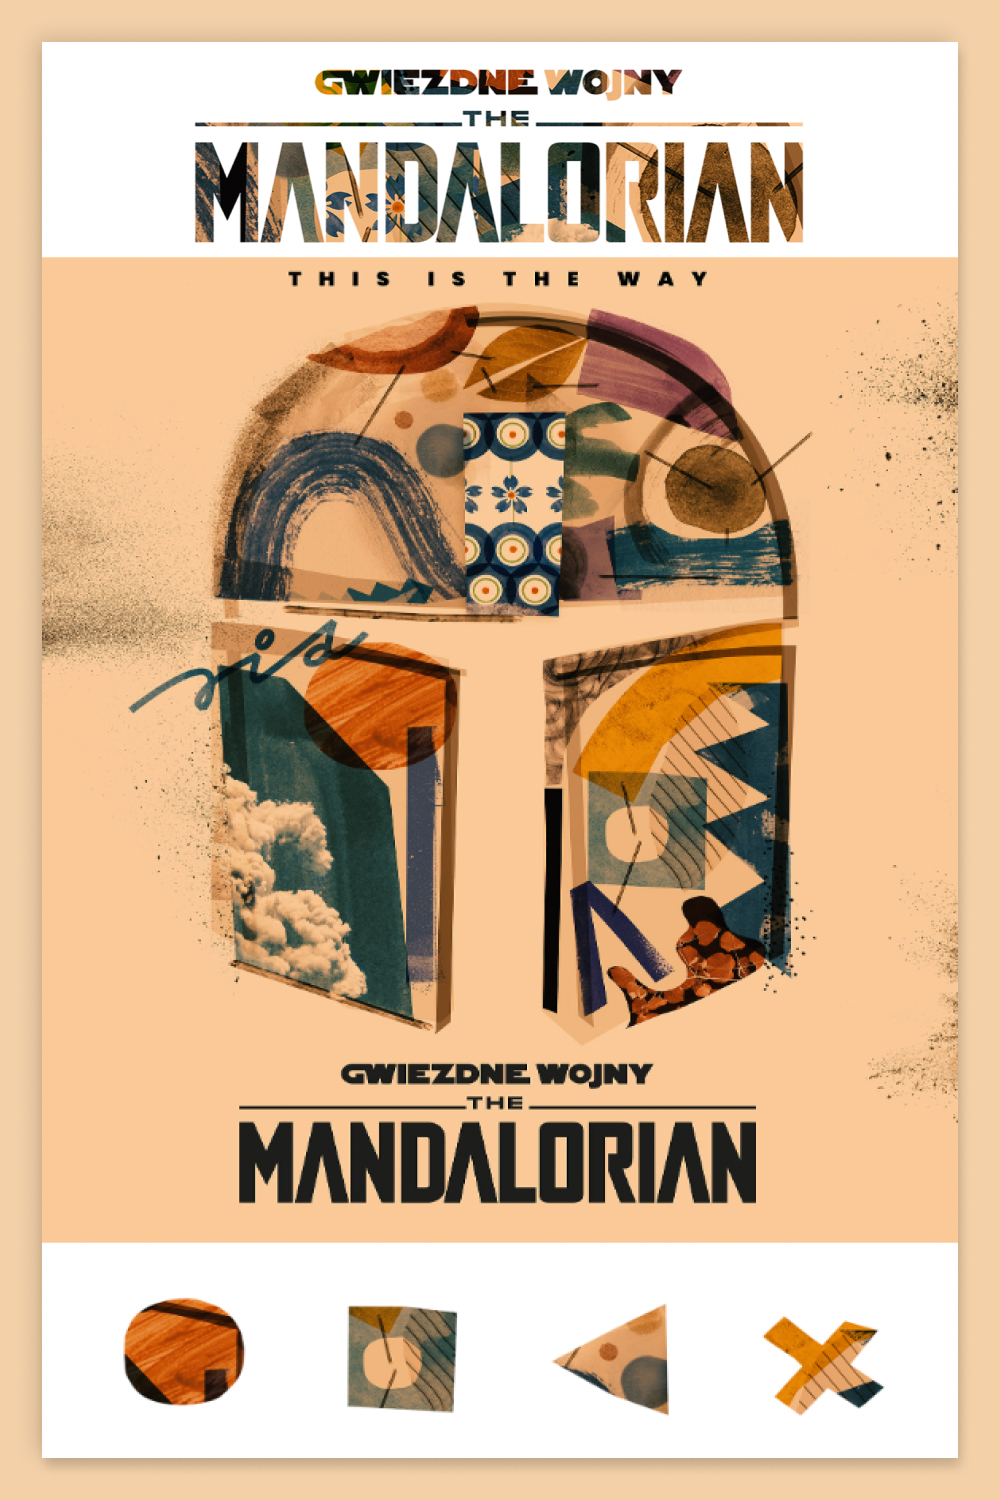 Poster and mural design of "The Mandalorian" (Lower Silesia version) for Disney+.